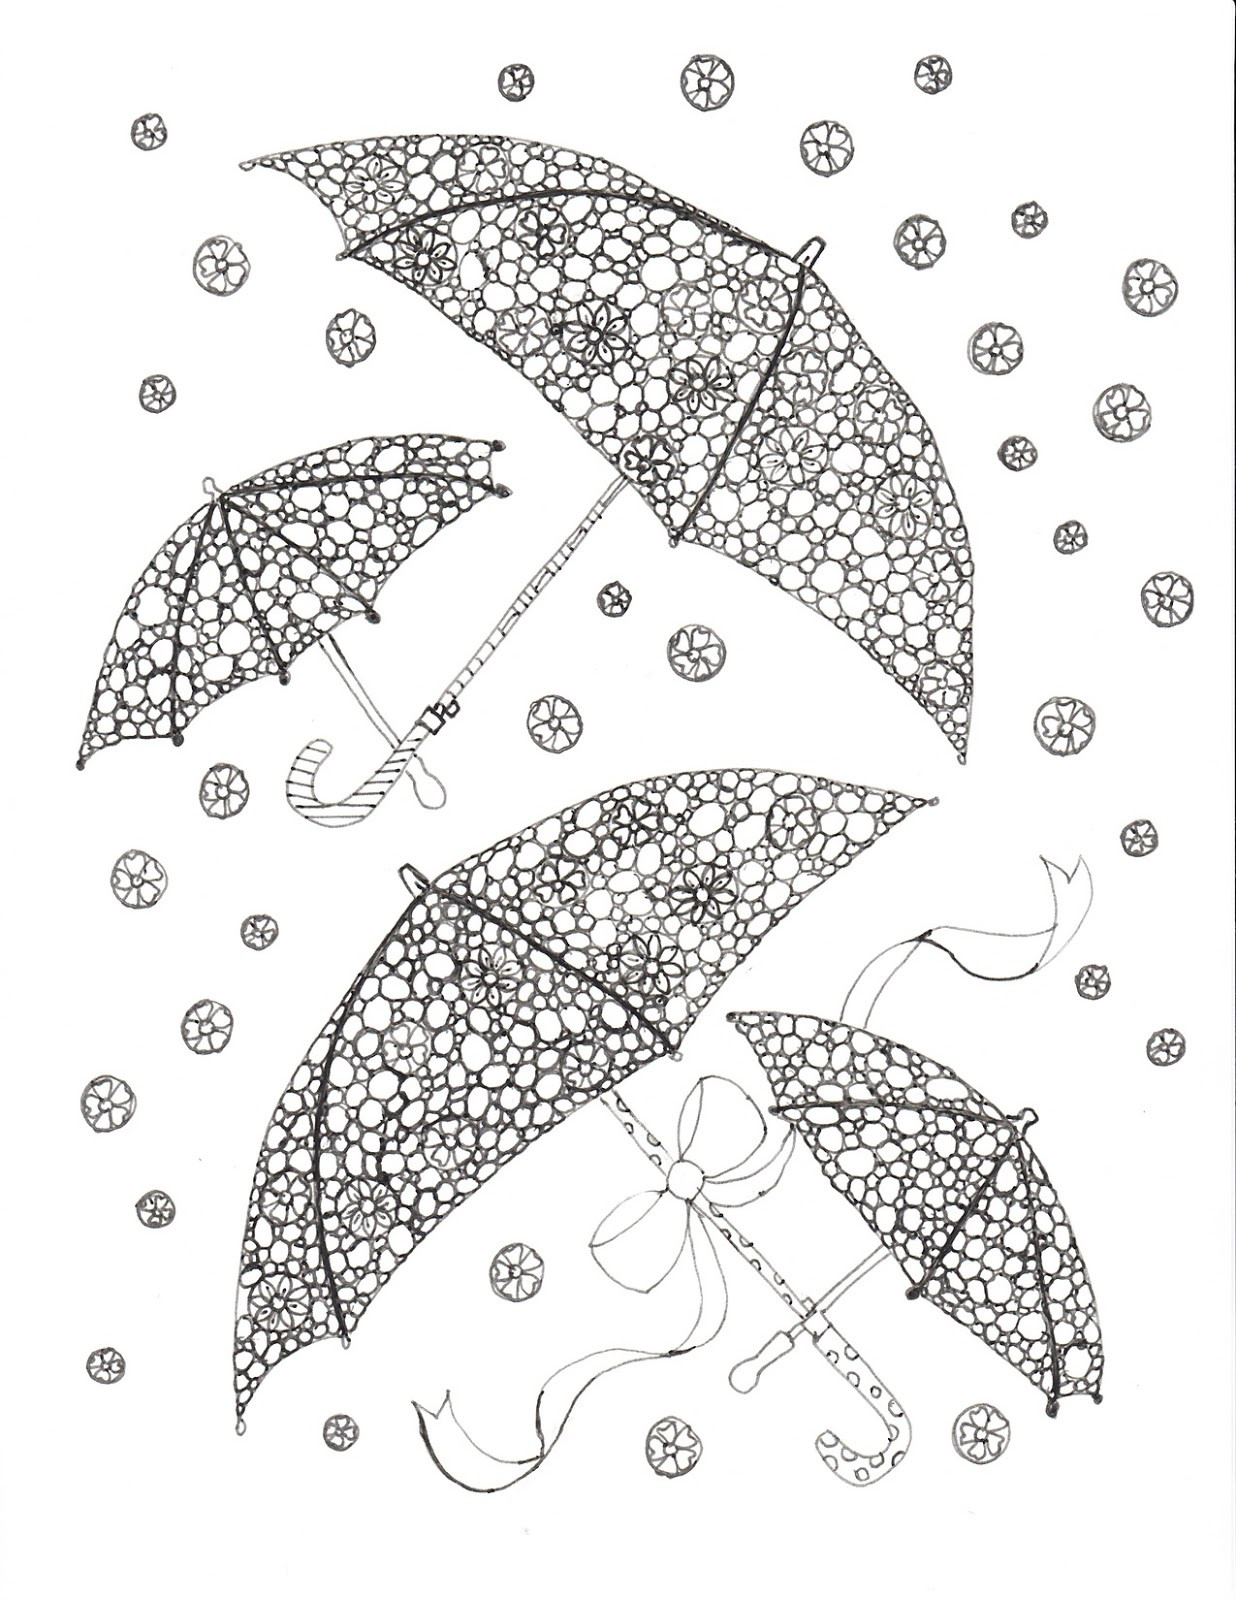 April Showers Coloring Pages
 Make it easy crafts April showers coloring page